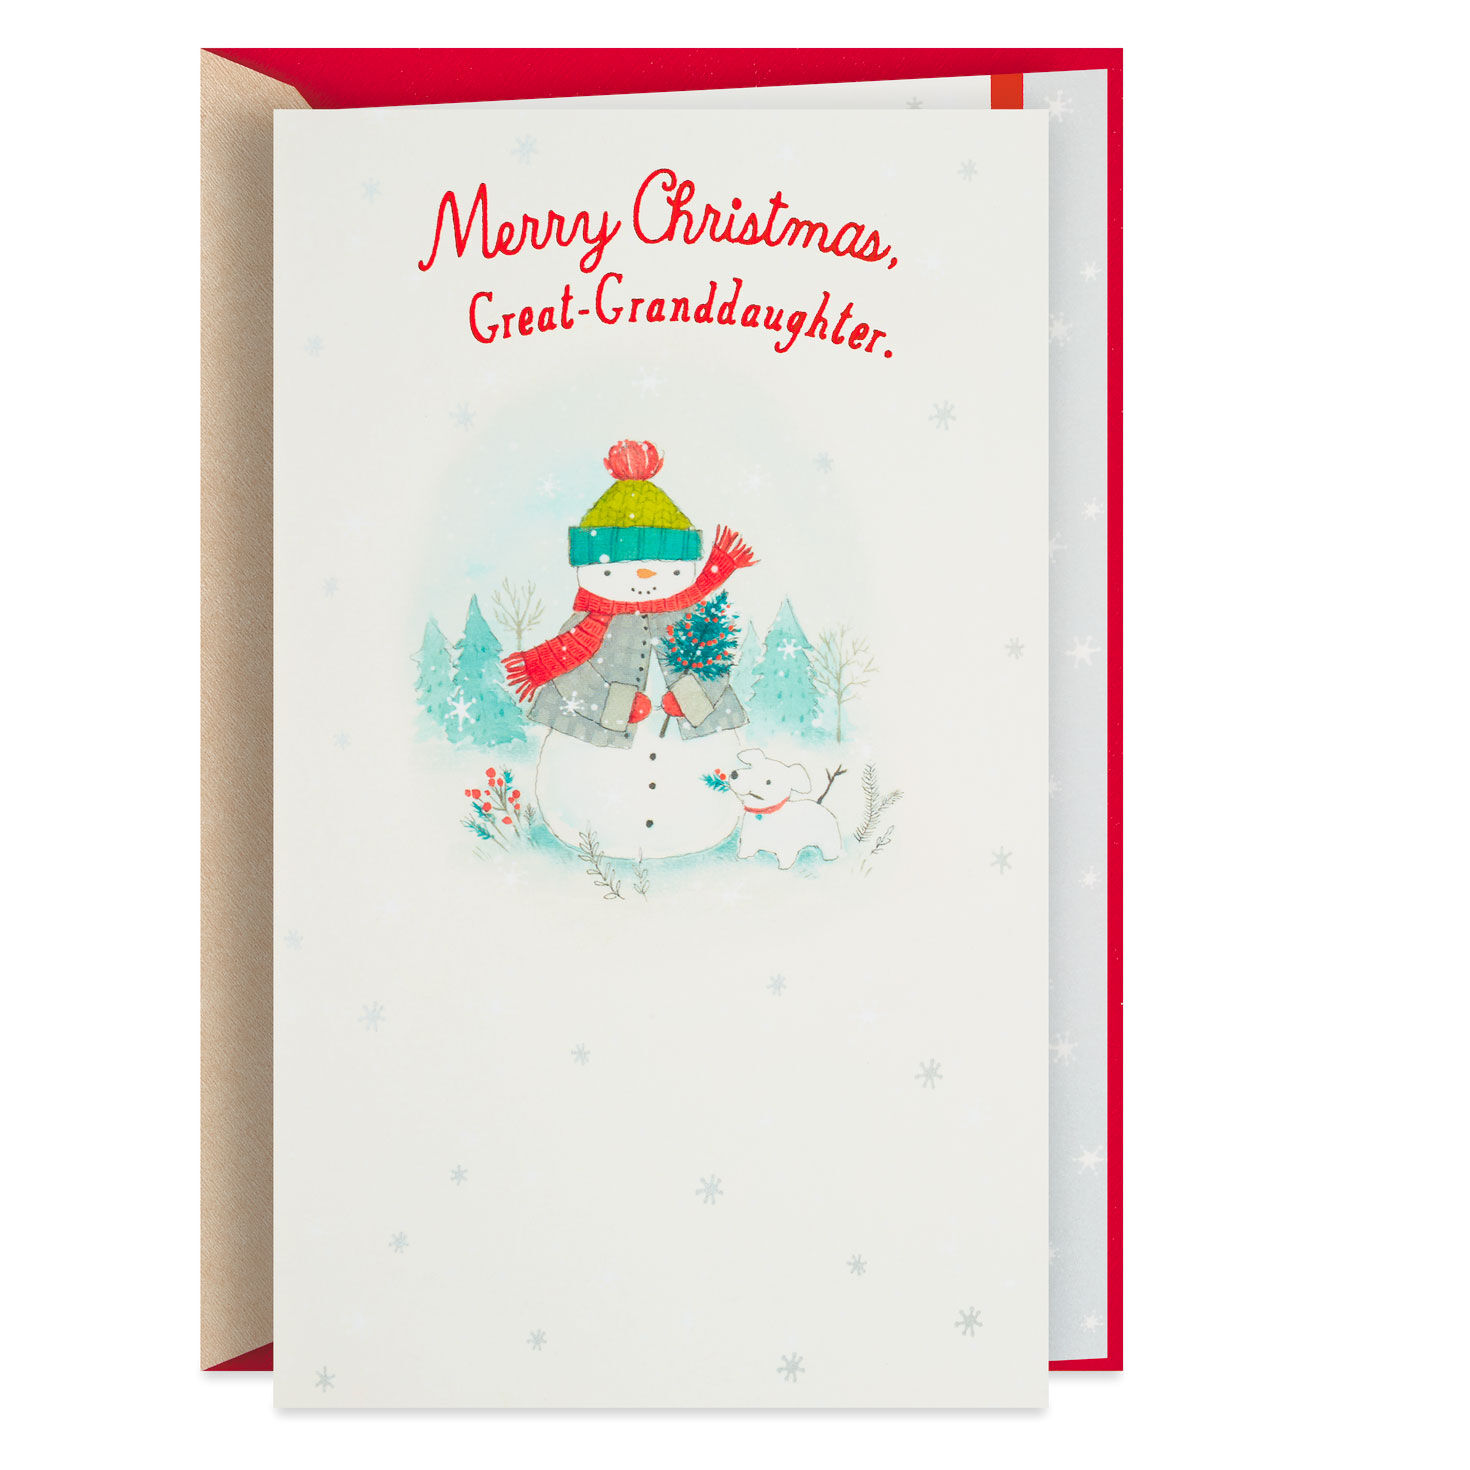 GREAT GRANDDAUGHTER CHRISTMAS CARD  CUTE TRADITIONAL FEMALE GIRL CHILD CHOICE 